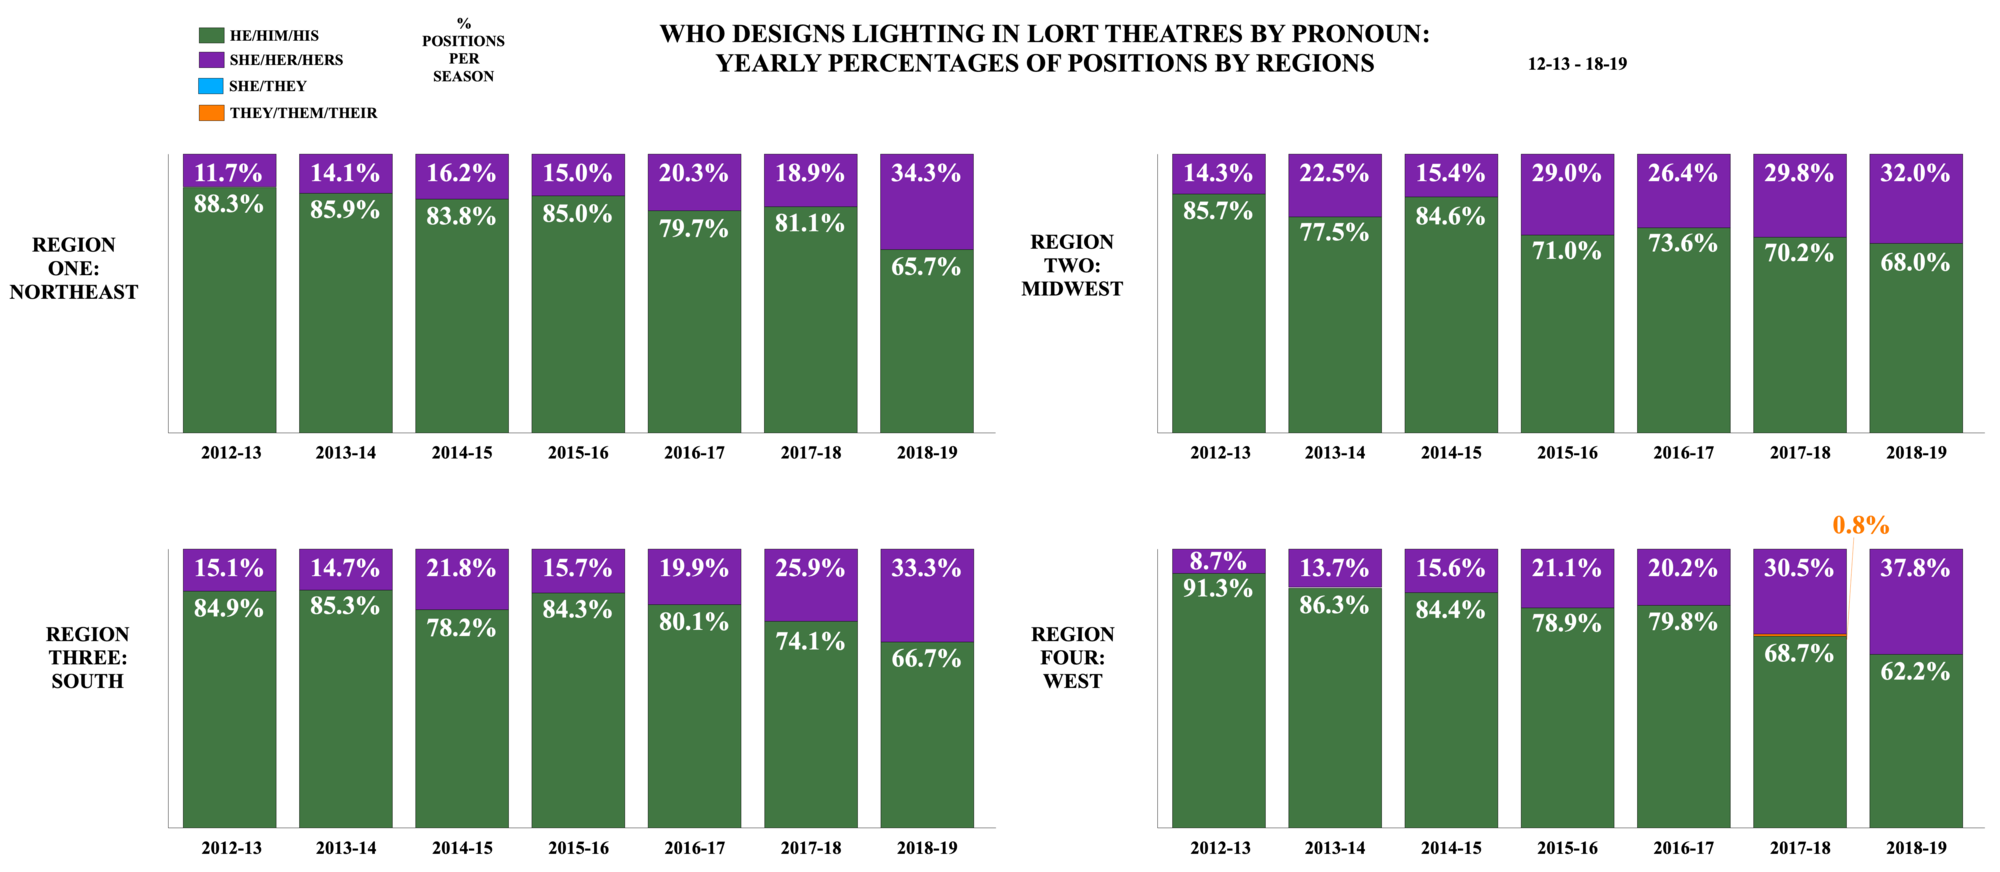 Who Designs Lighting in LORT Theatres by Pronoun: Yearly Percentages of Positions by Regions